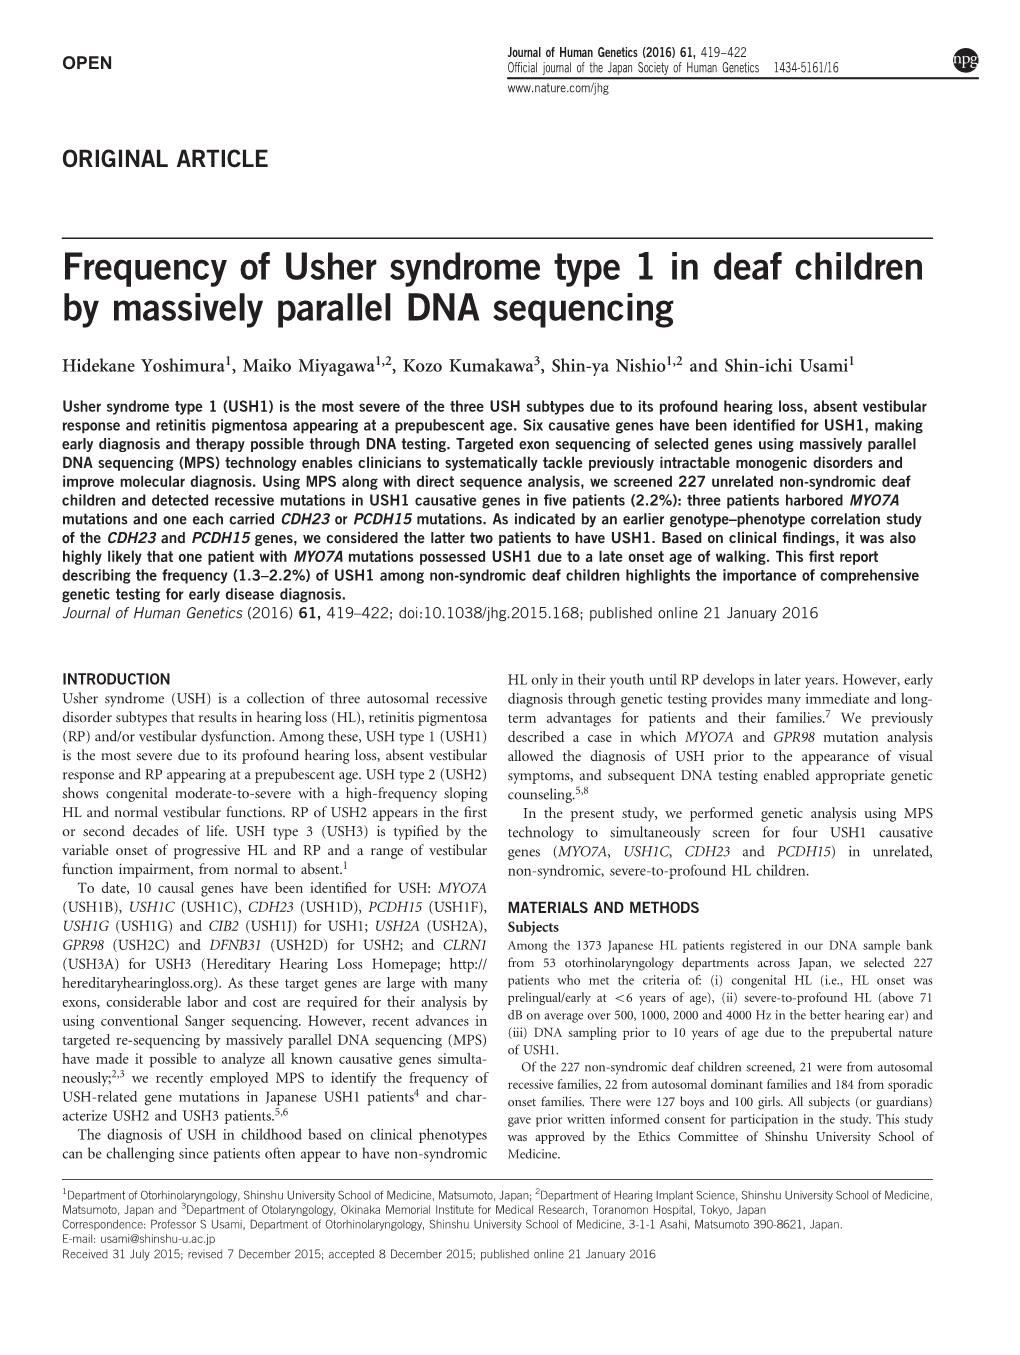 Frequency of Usher Syndrome Type 1 in Deaf Children by Massively Parallel DNA Sequencing